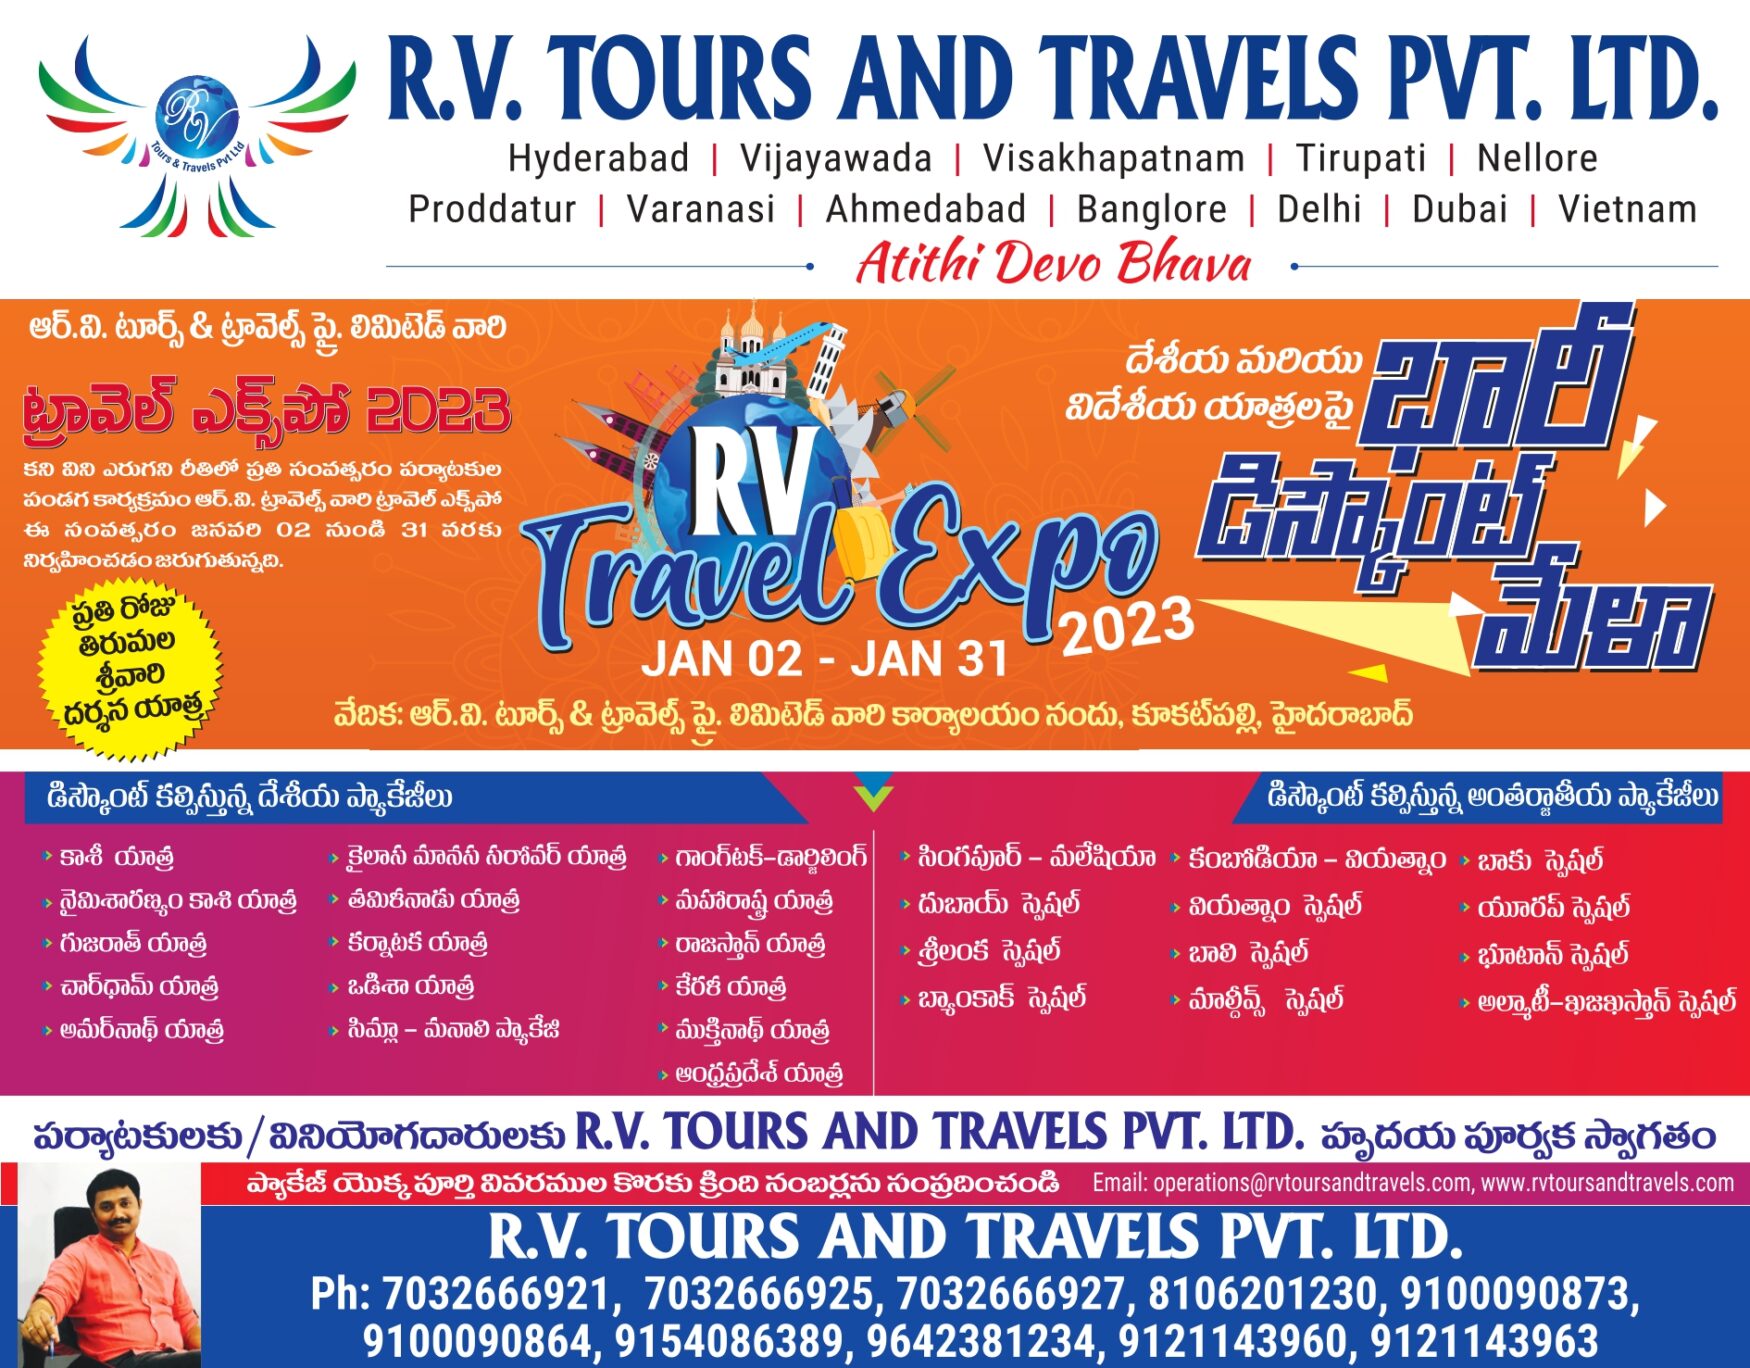 r.v. tours and travels pvt. ltd. photos